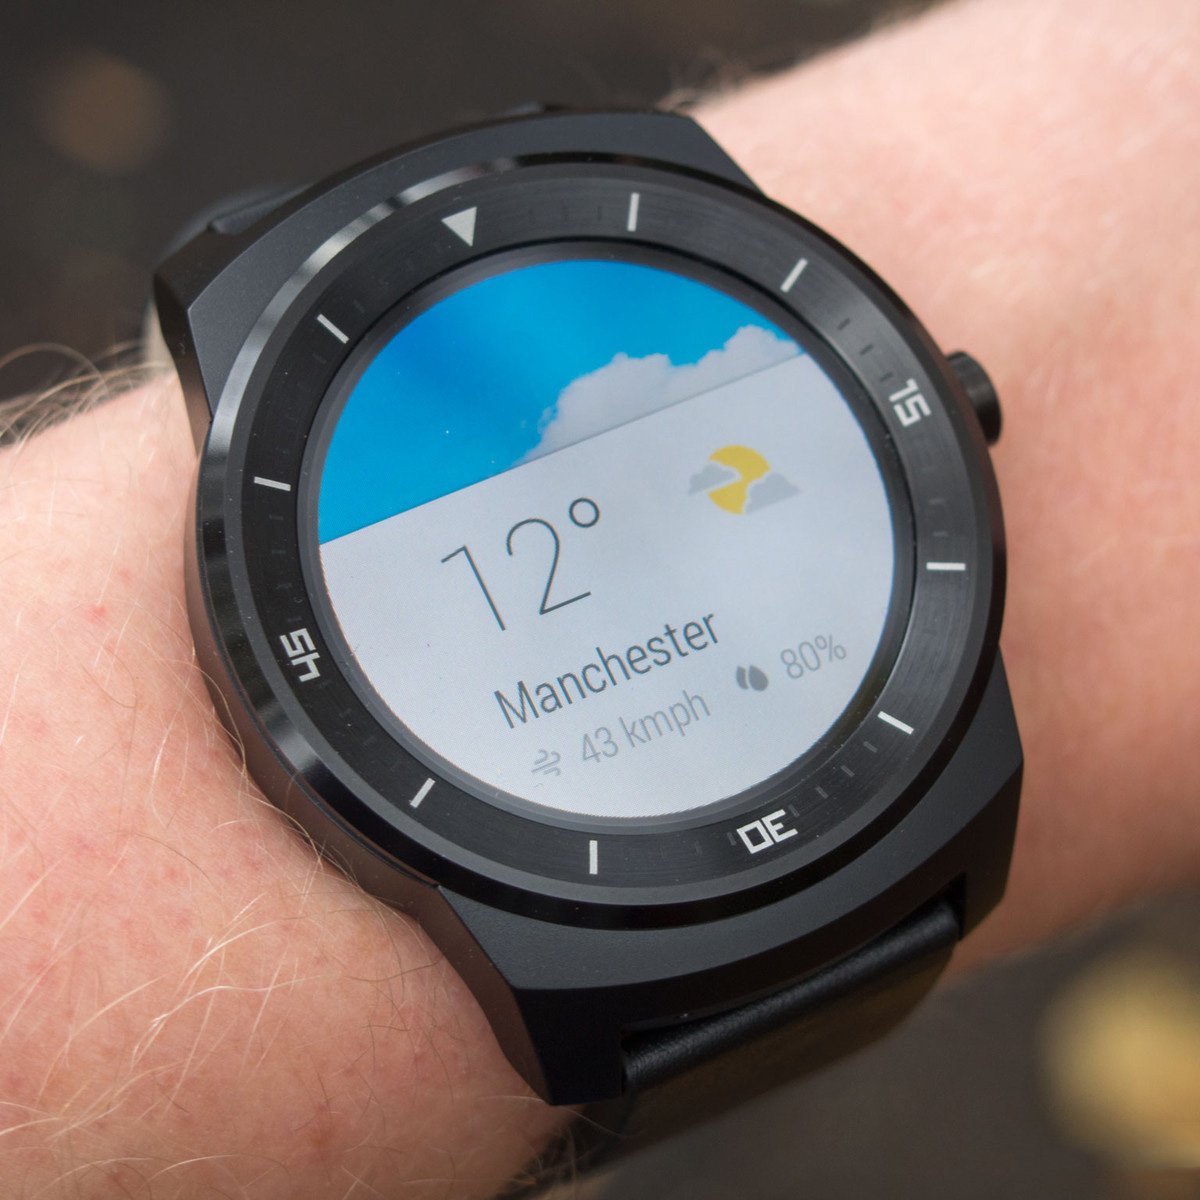 Android Wear Circle Smart Watch by LG